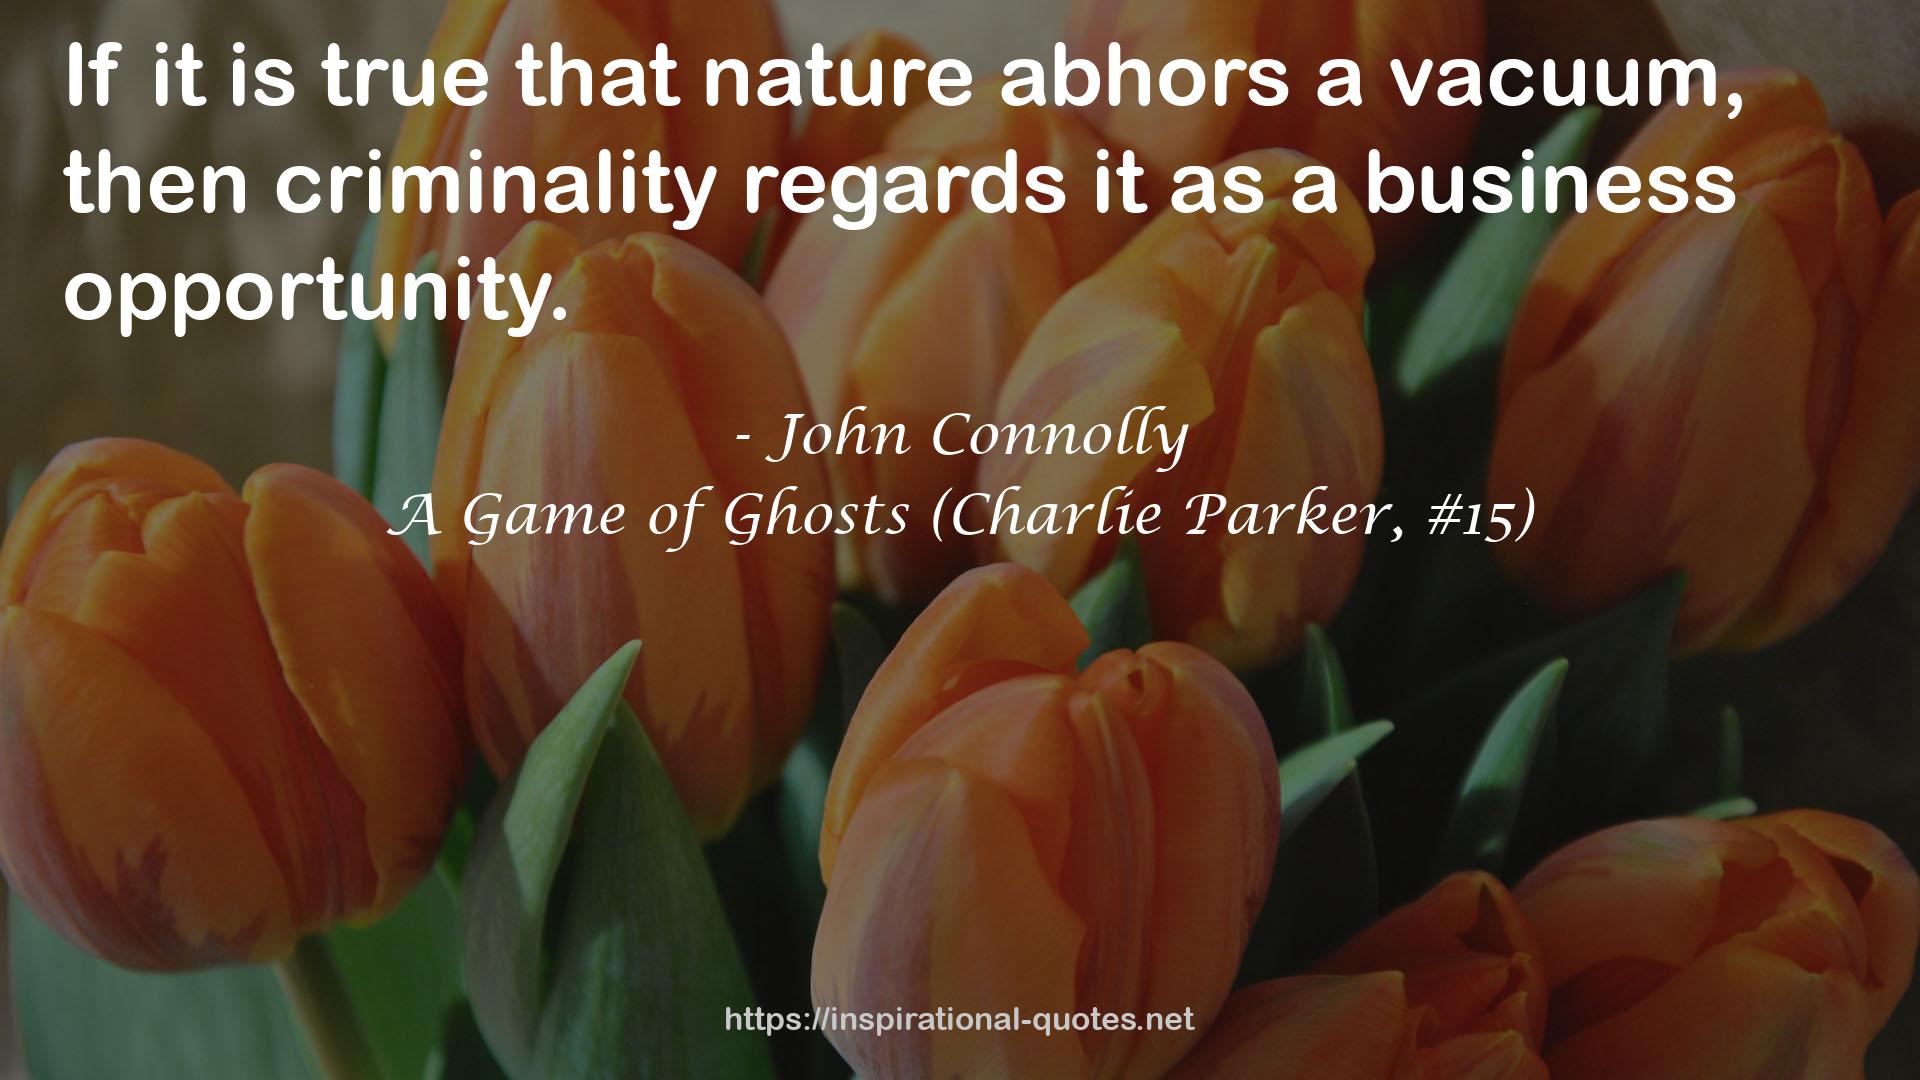 A Game of Ghosts (Charlie Parker, #15) QUOTES